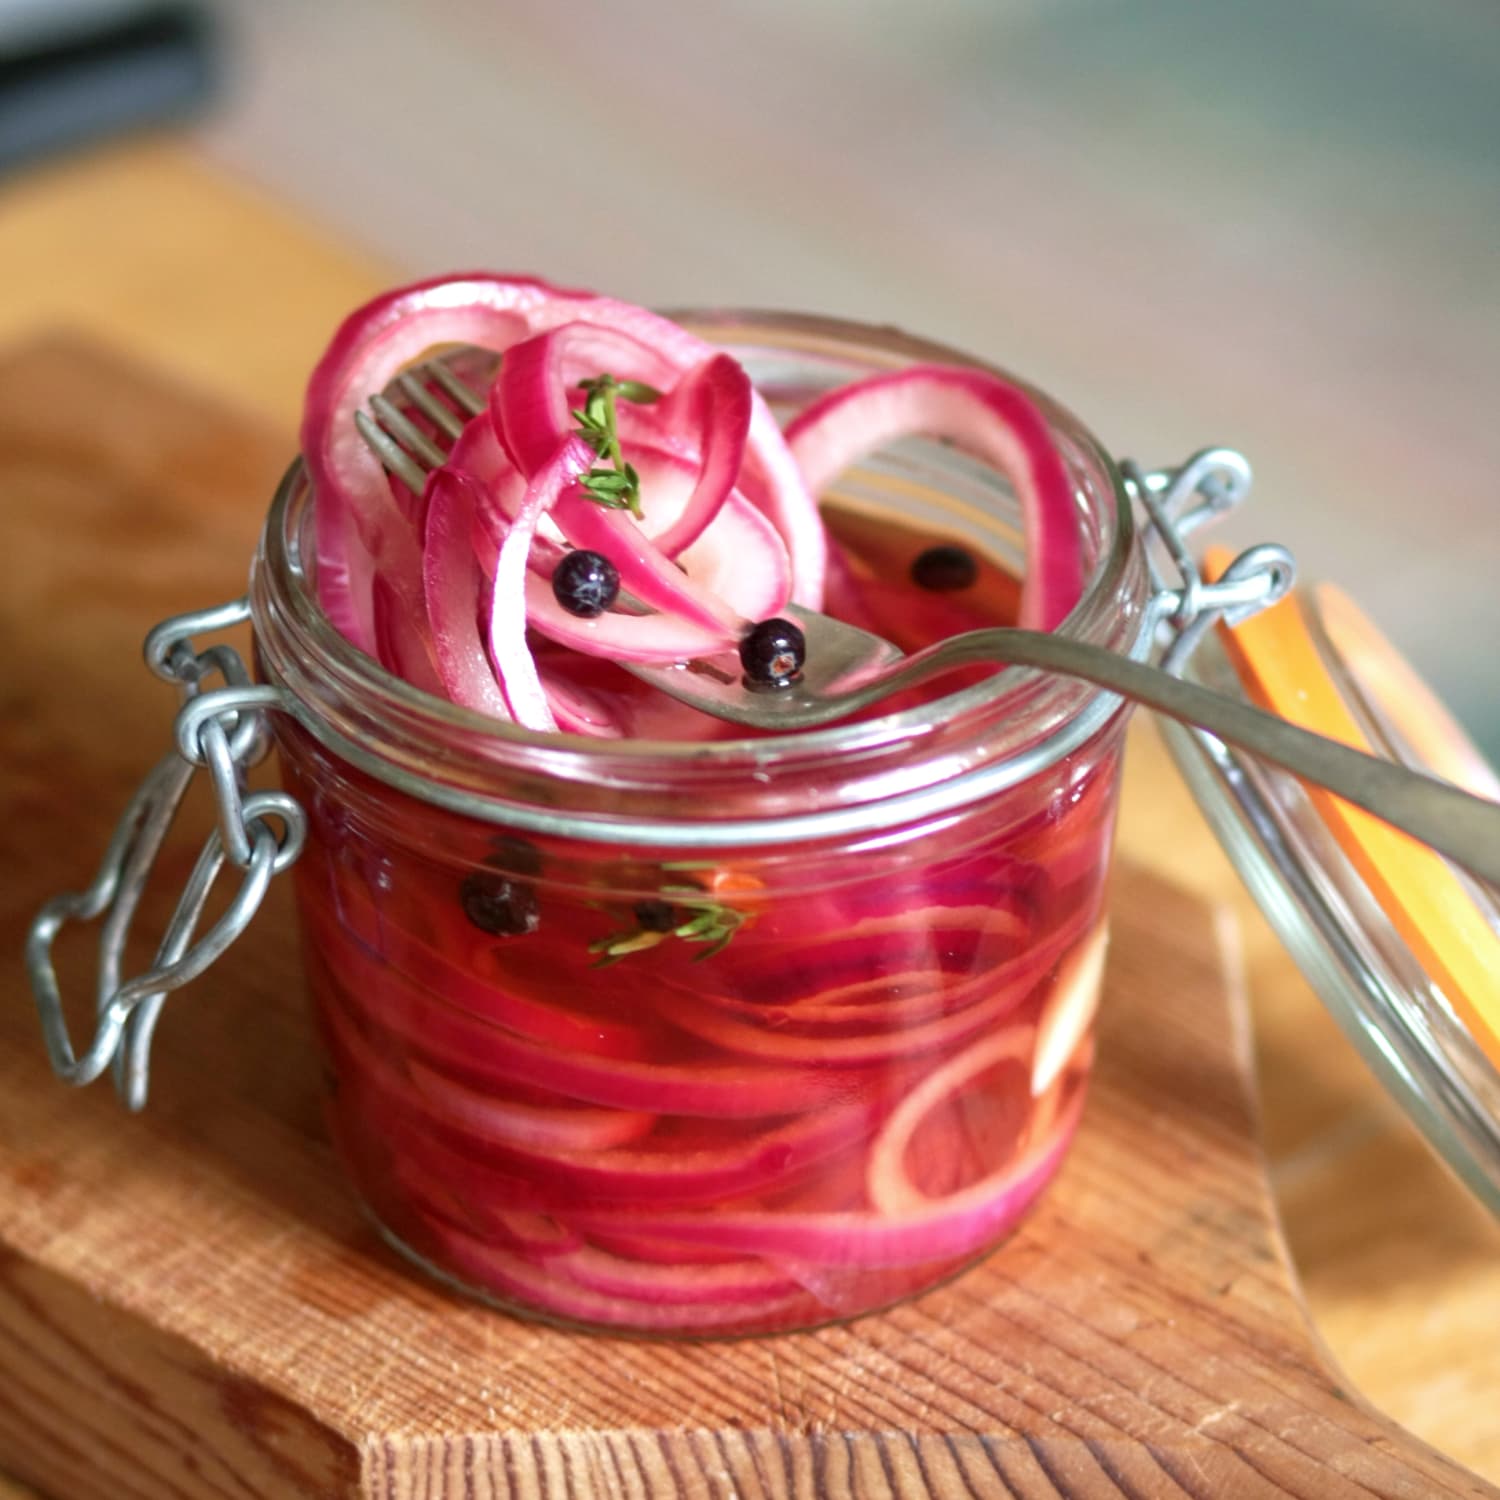 Quick-Pickled Red Onions Recipe (Zesty & Crunchy) | Kitchn